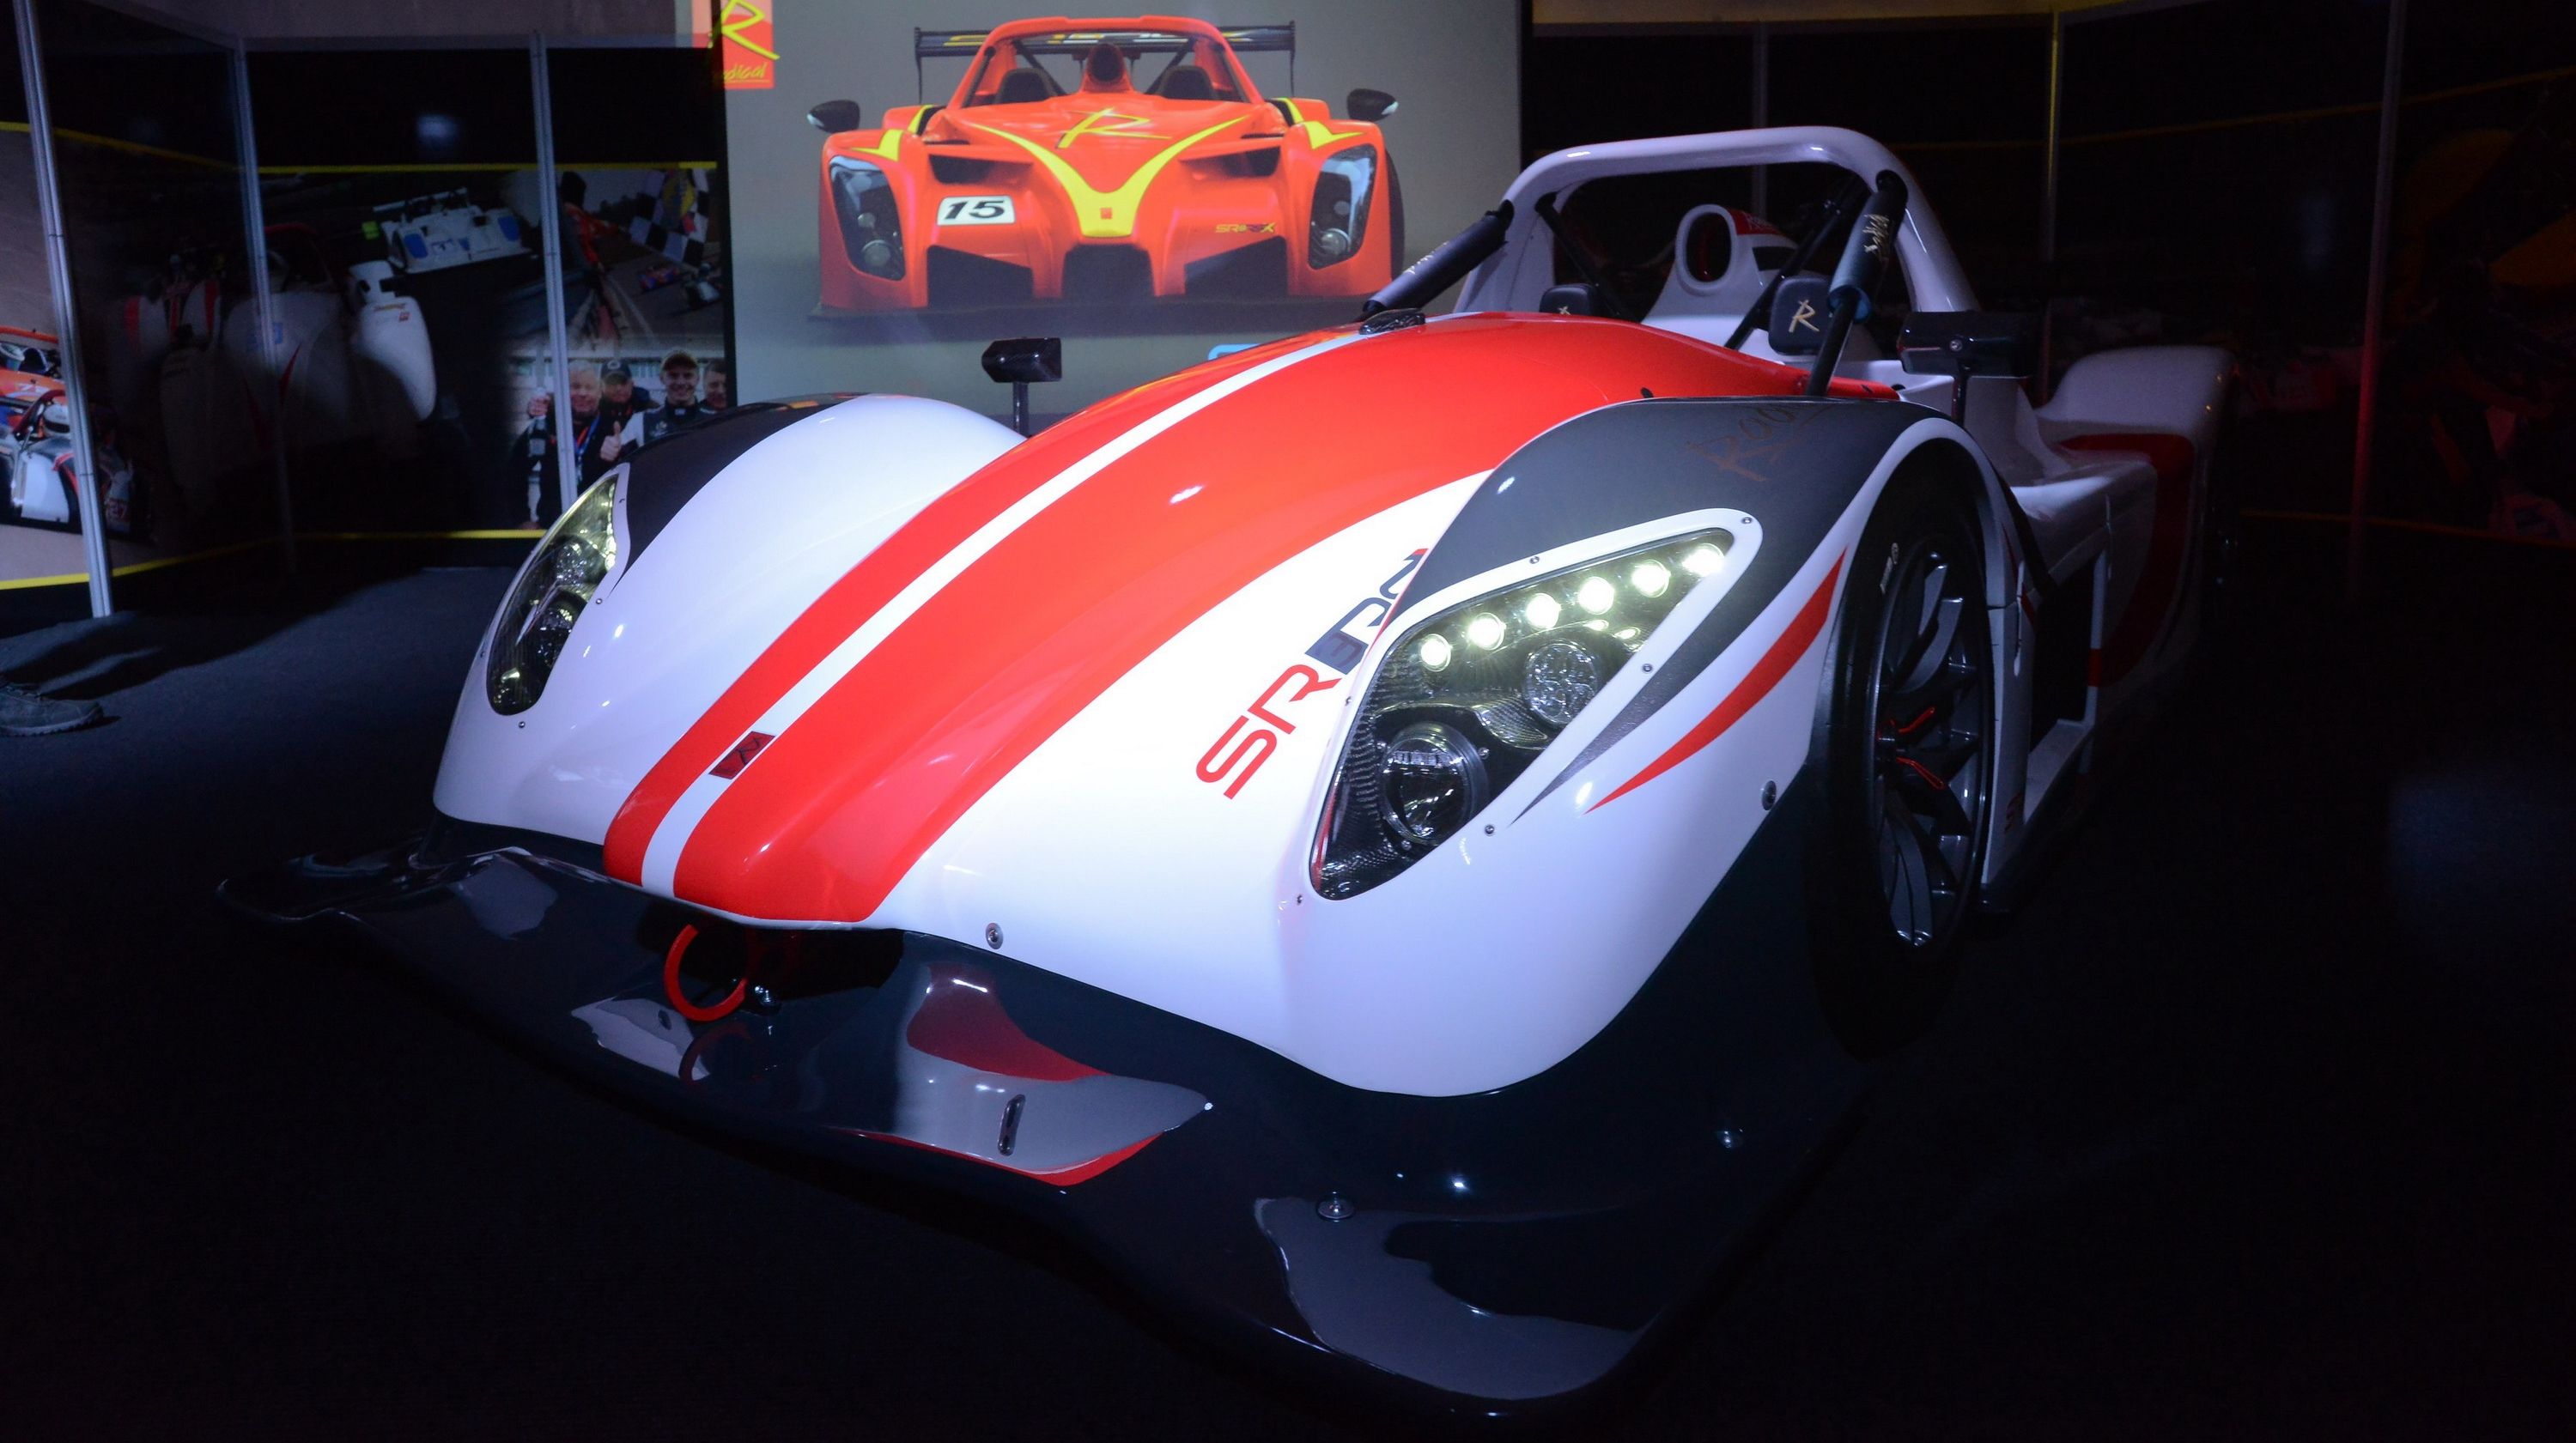  The Radical SR3 RSX may only have 210 horsepower, but it packs a mean punch. 